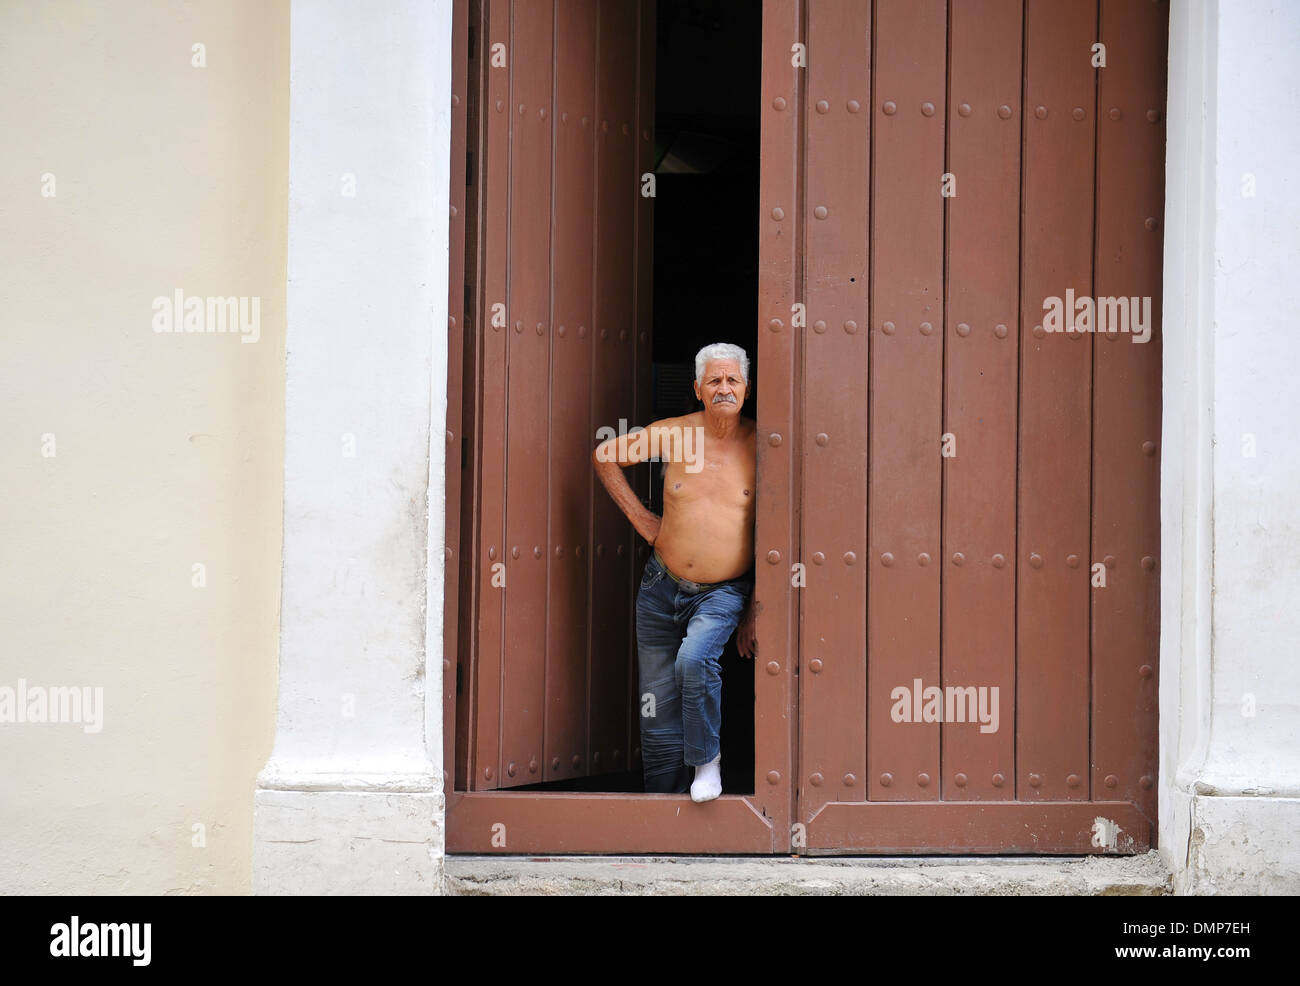 Man looking out onto the street in Havana, Cuba Stock Photo